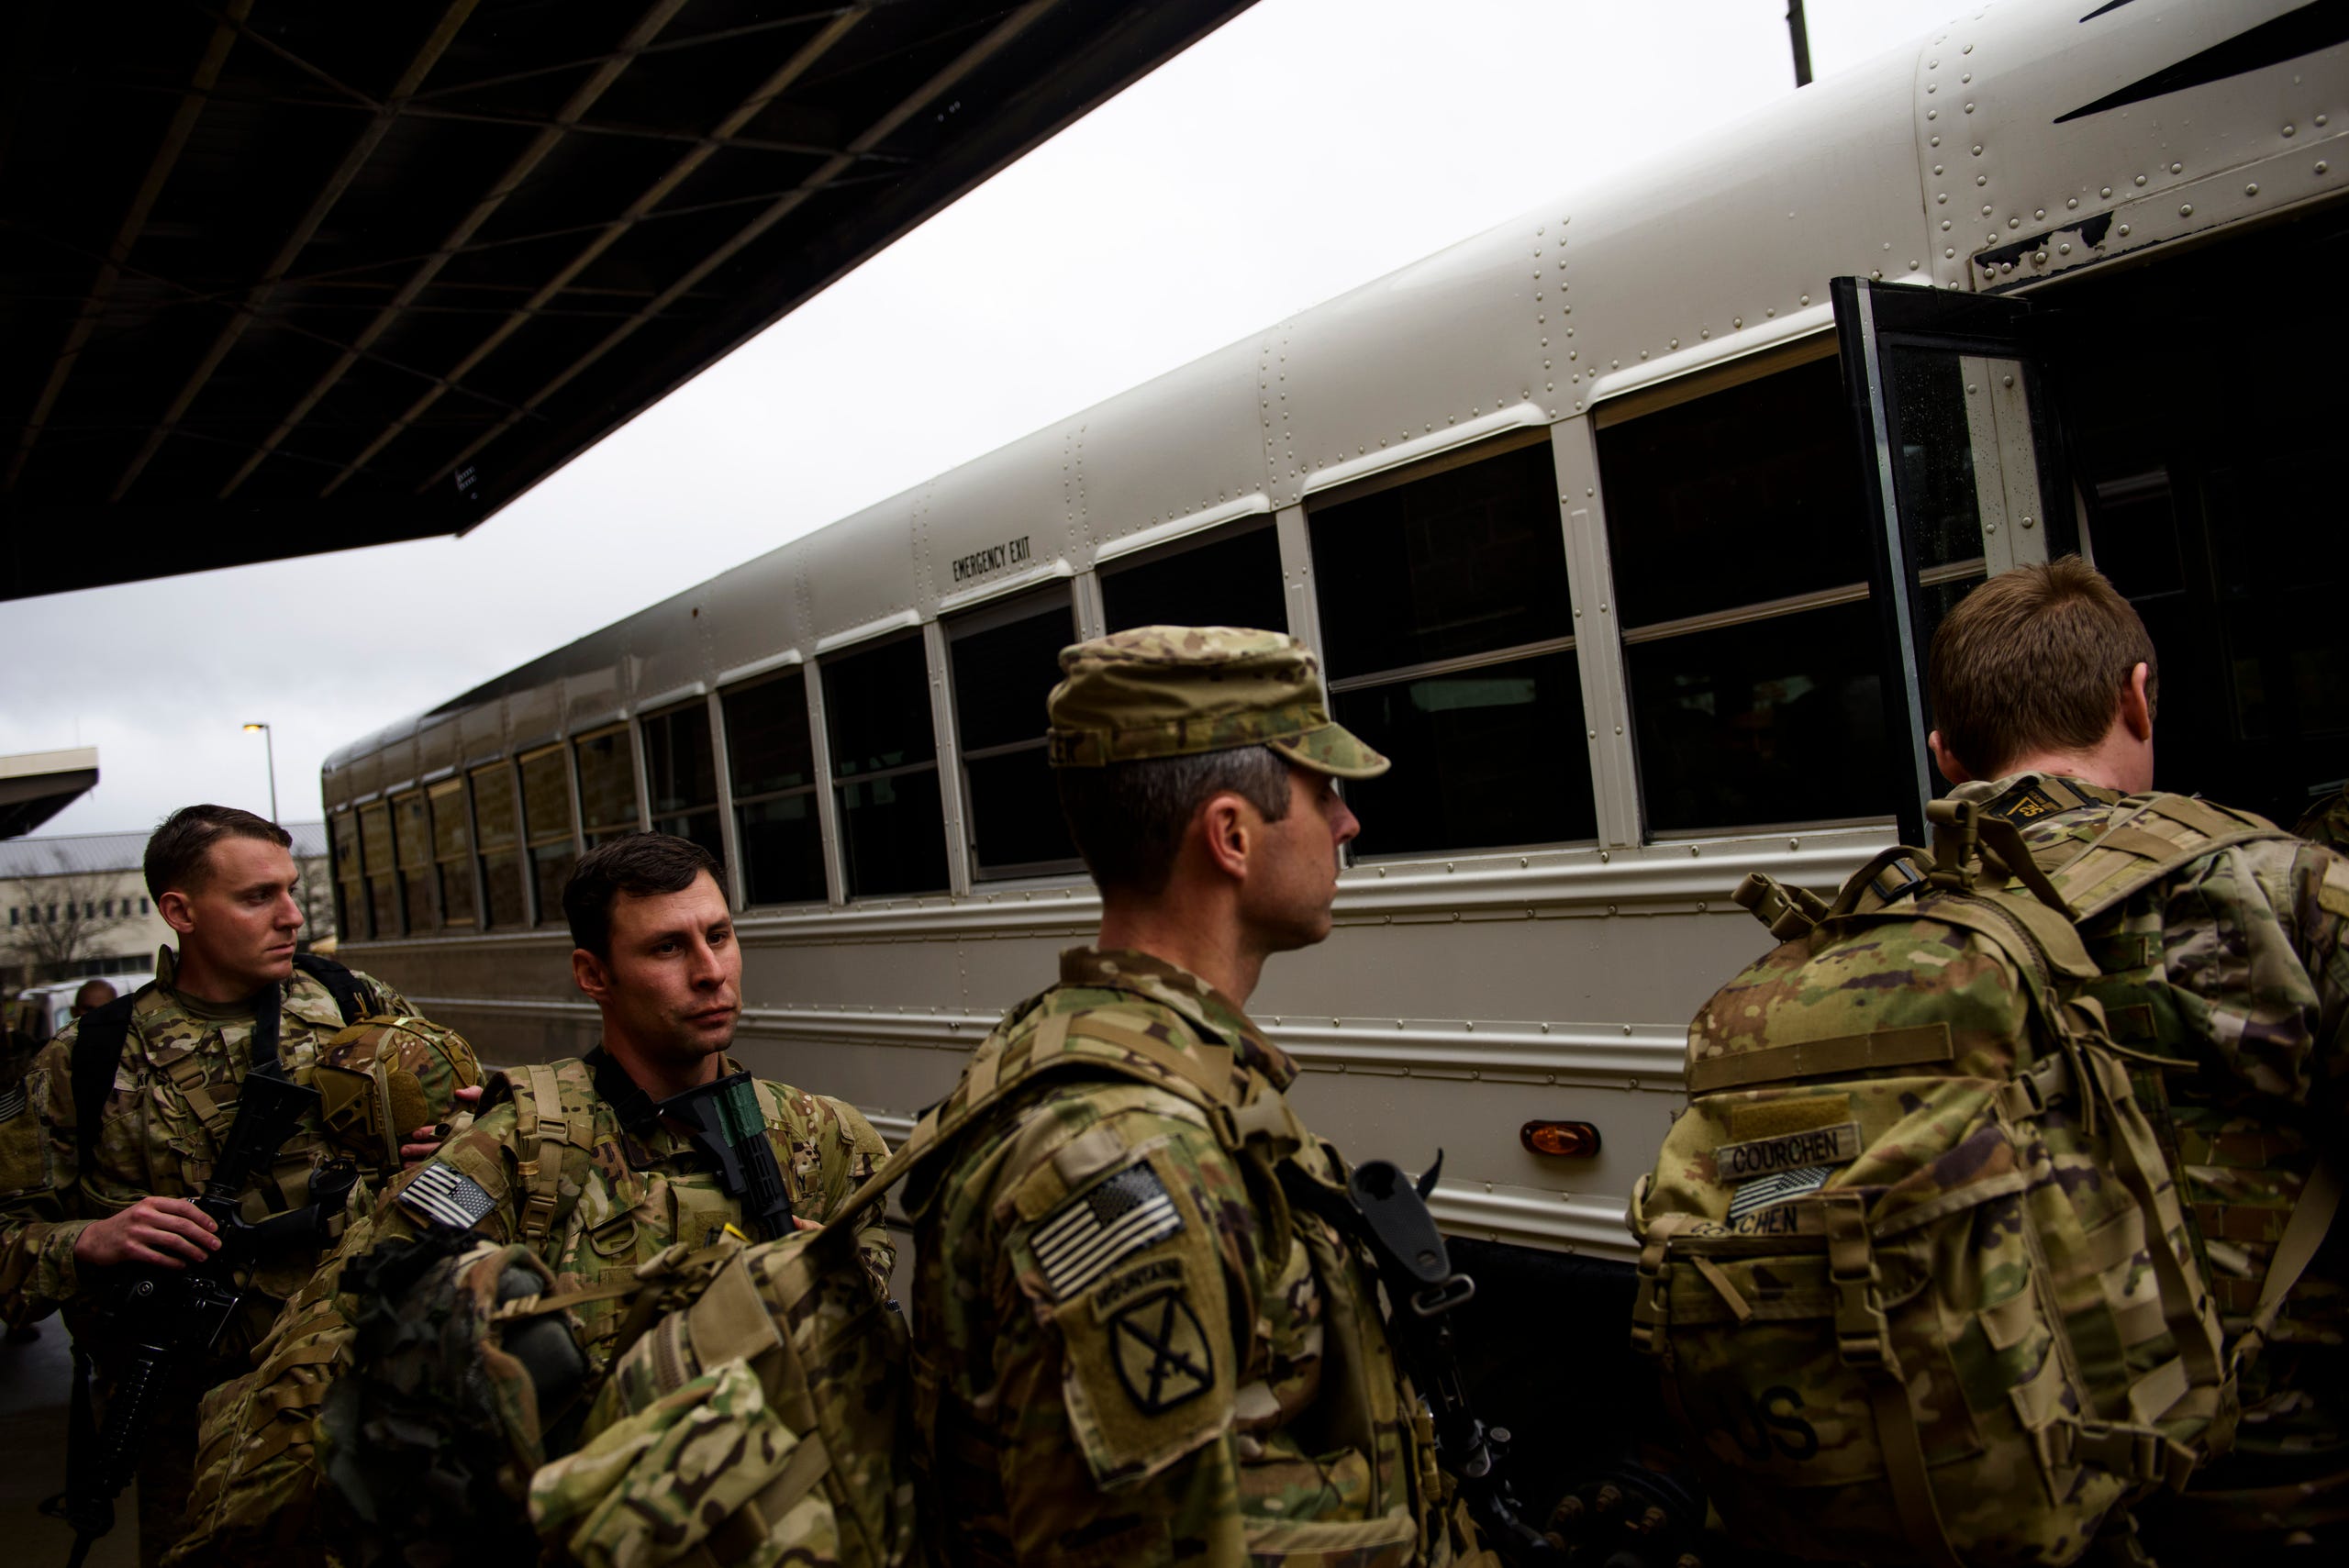 Soldiers with the 82nds Airborne Division load a bus to be transported to a military transport aircraft at Fort Bragg.